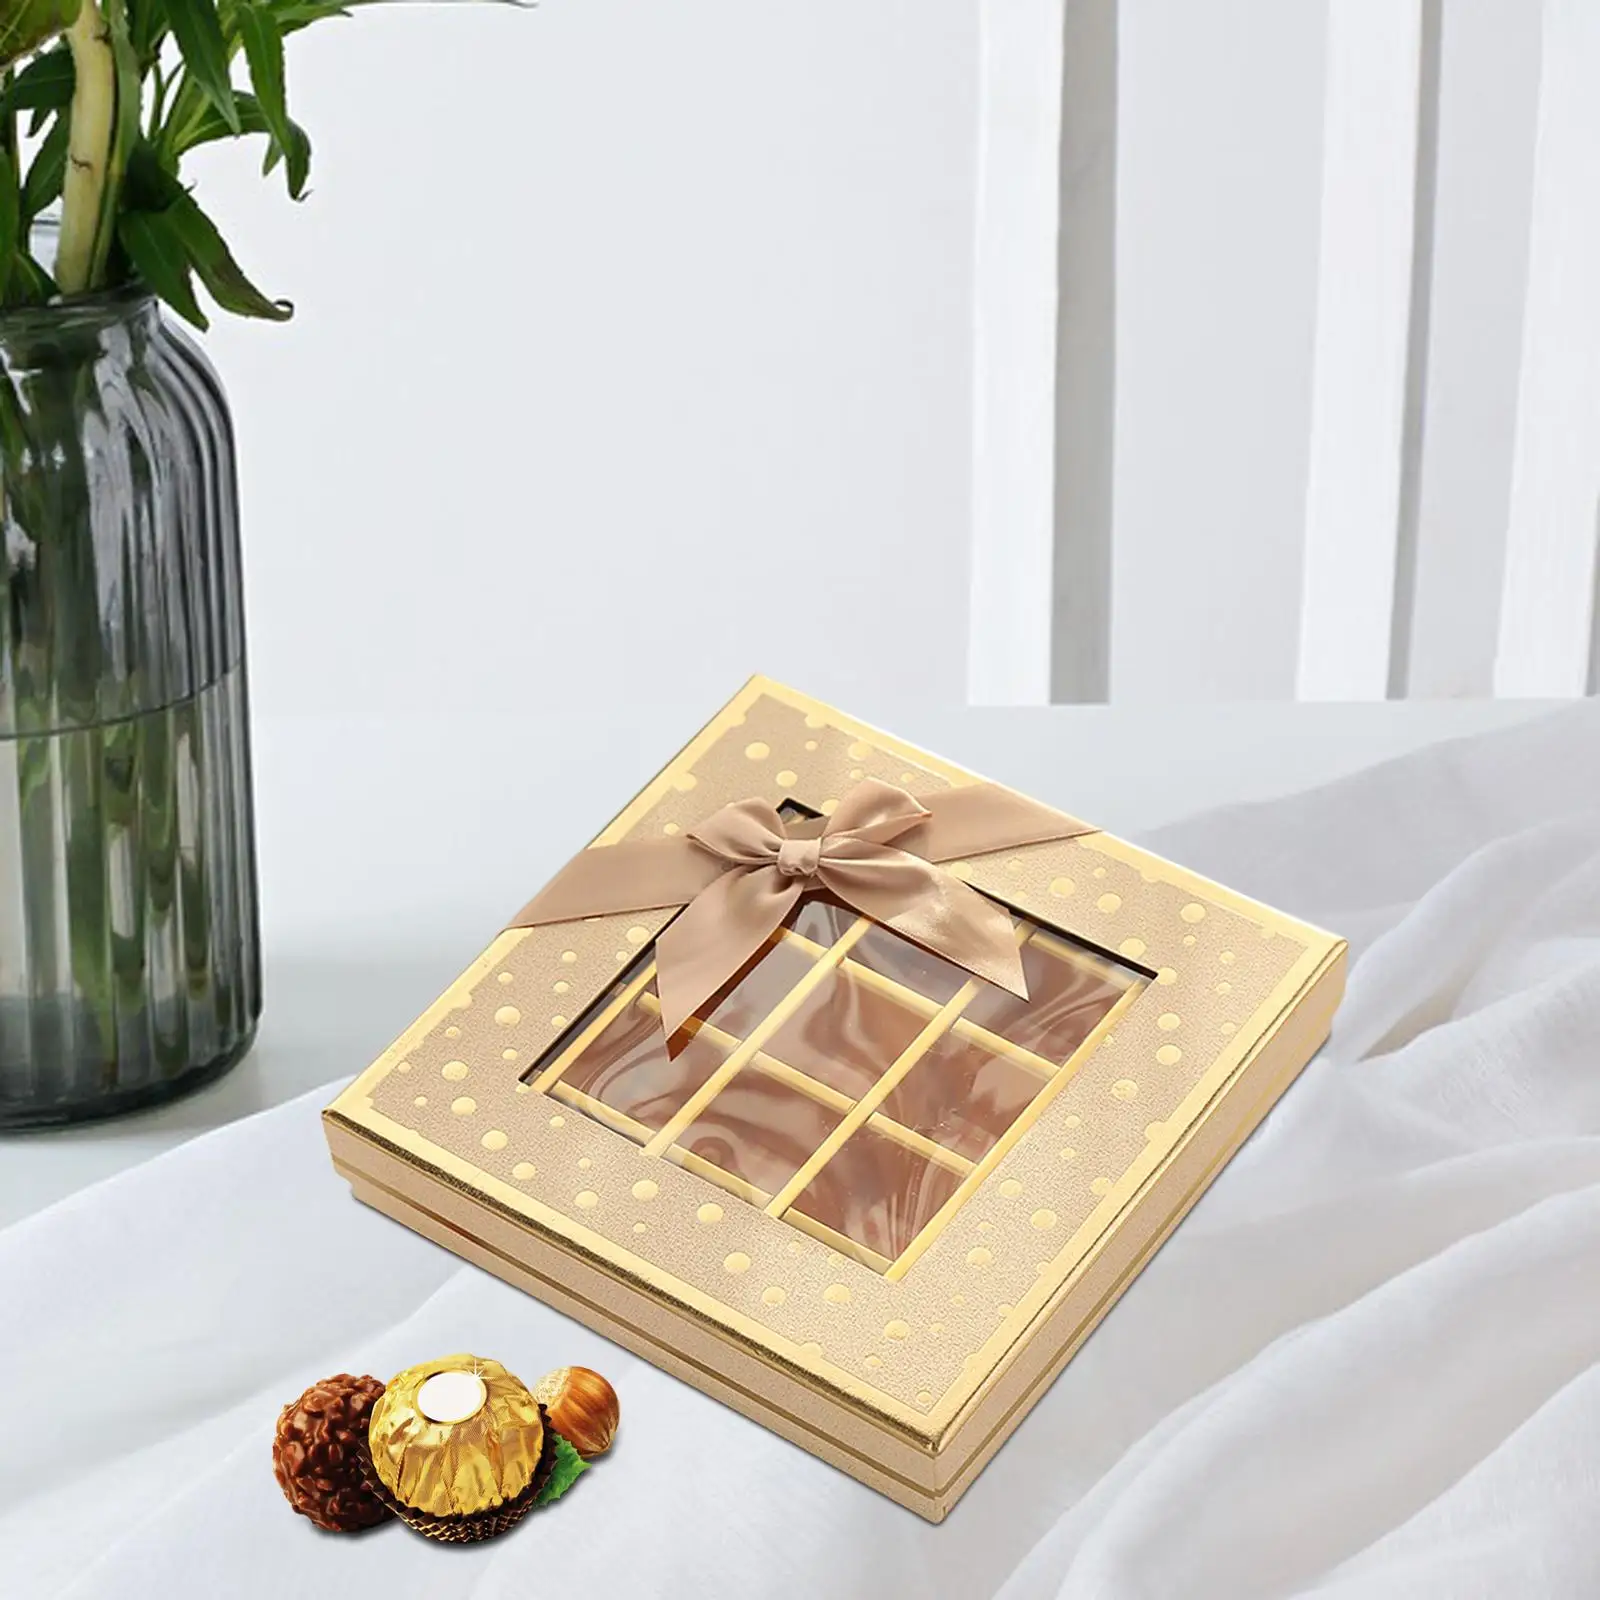 Chocolate Box 25 Inner Grids Valentines Day Gift for Wife Husband Wedding